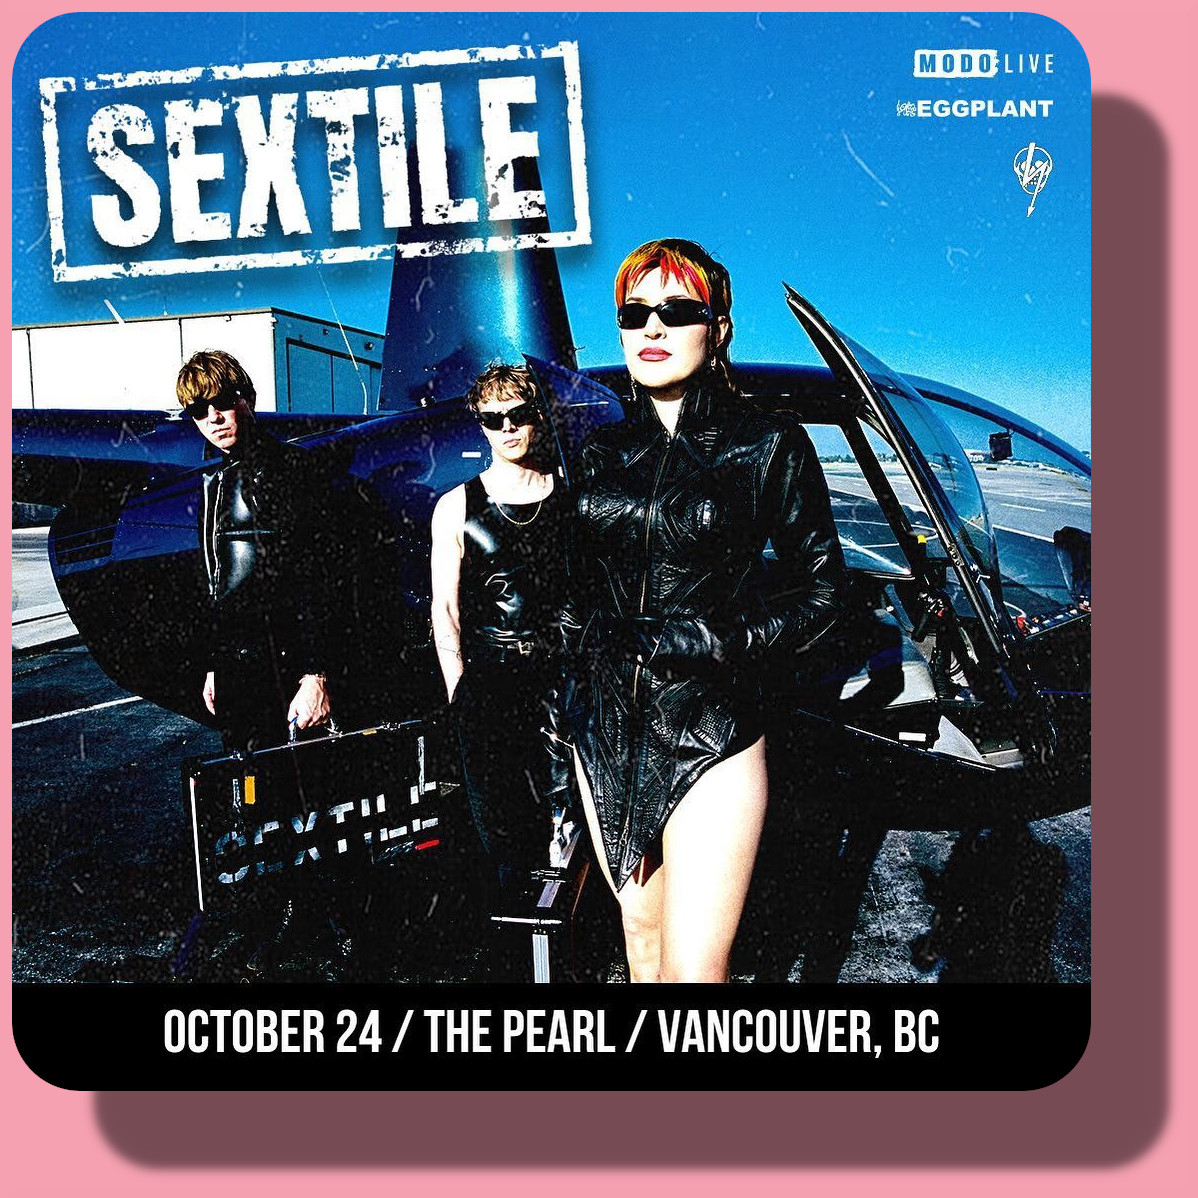 Sextile Live at The Pearl in Vancouver, British Columbia